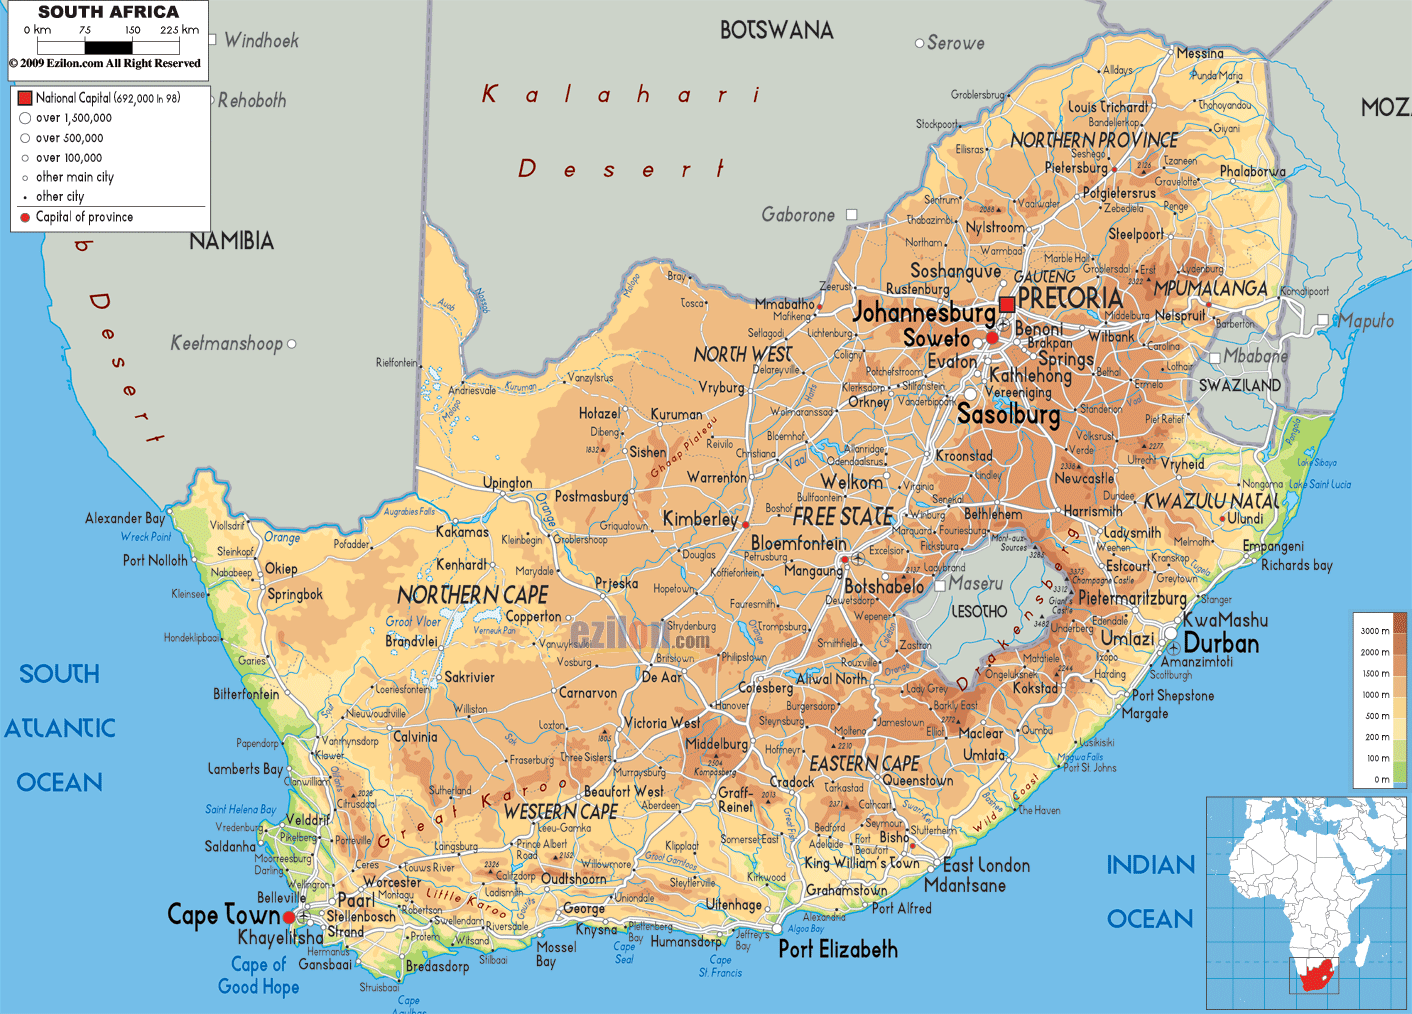 Map of South Africa_4.jpg